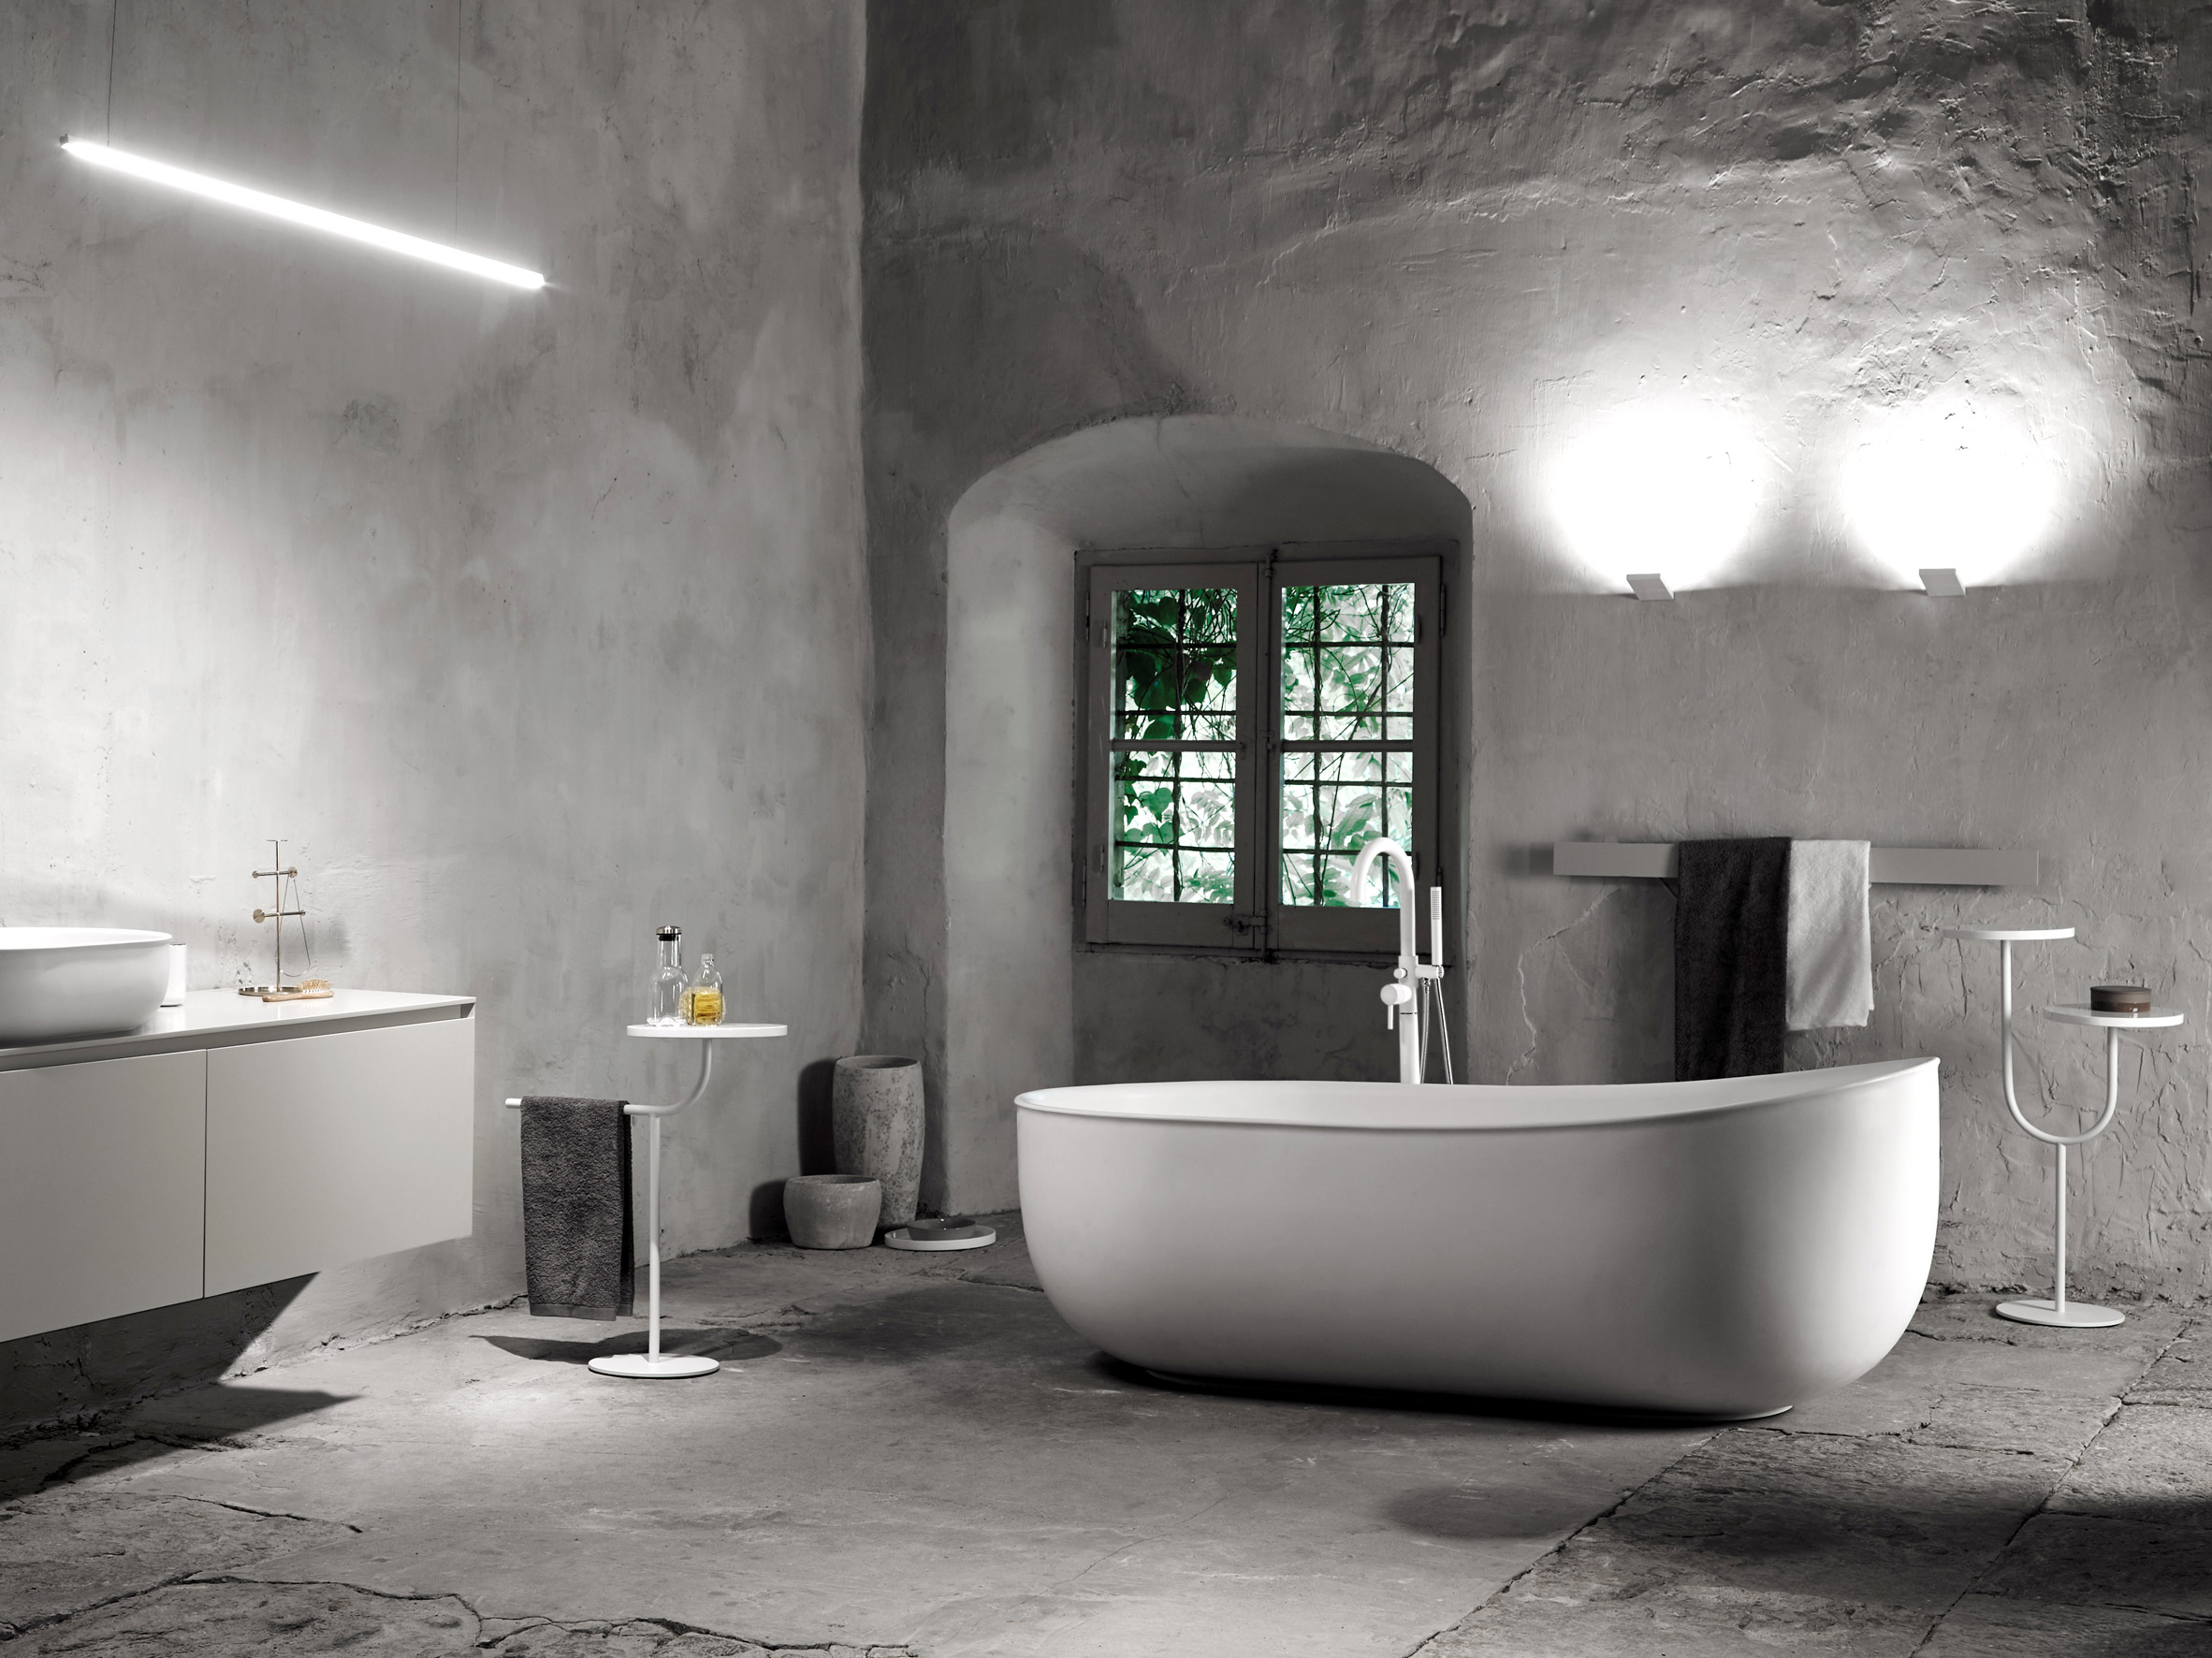 Prime bathroom line by Norm Architects for Inbani